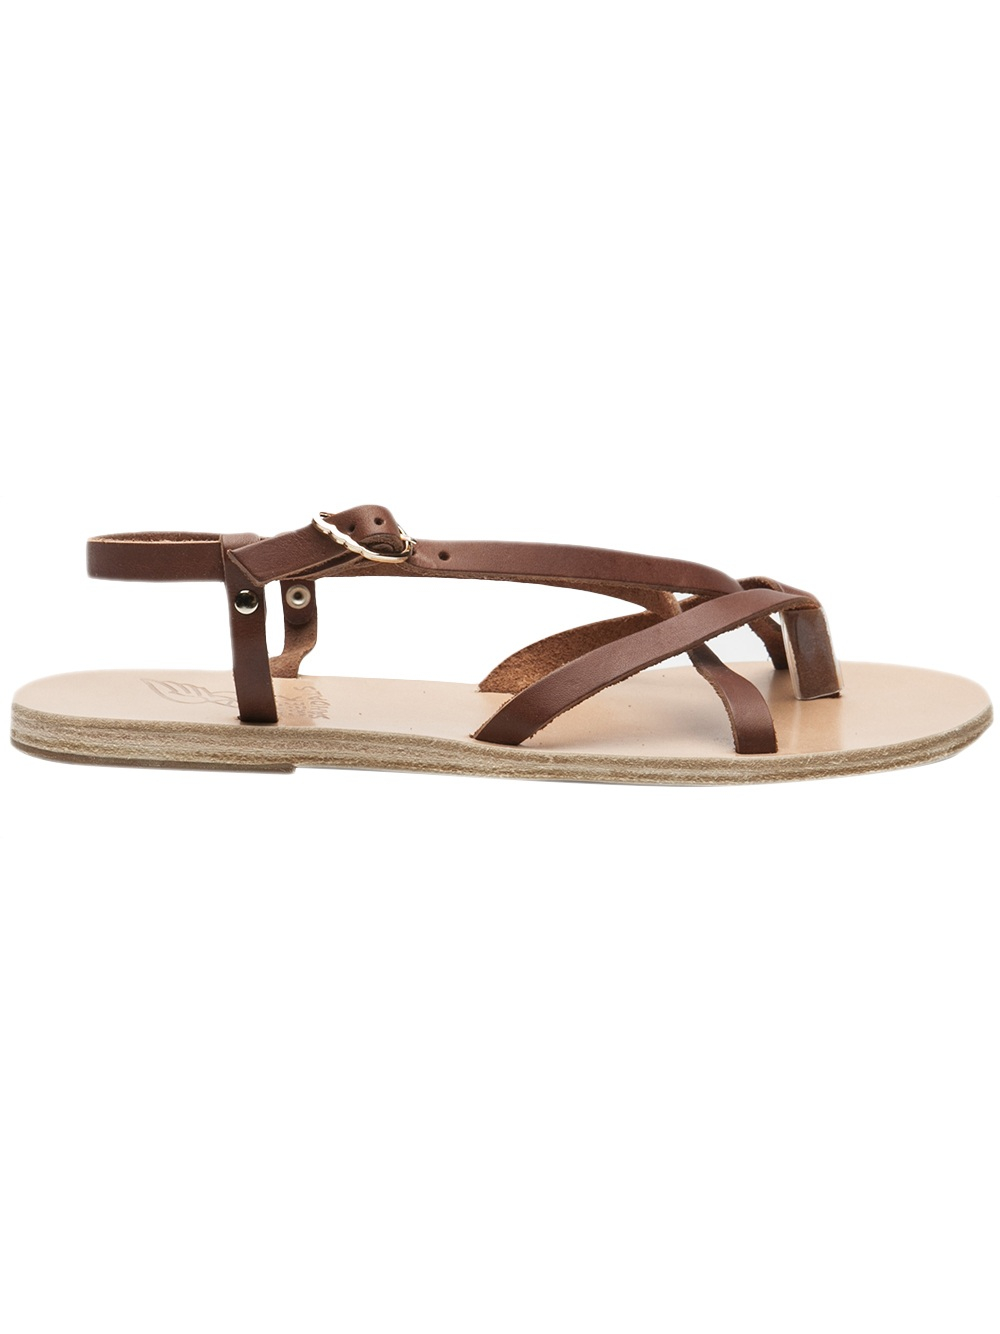 Ancient greek sandals Semele Leather Sandals in Brown | Lyst